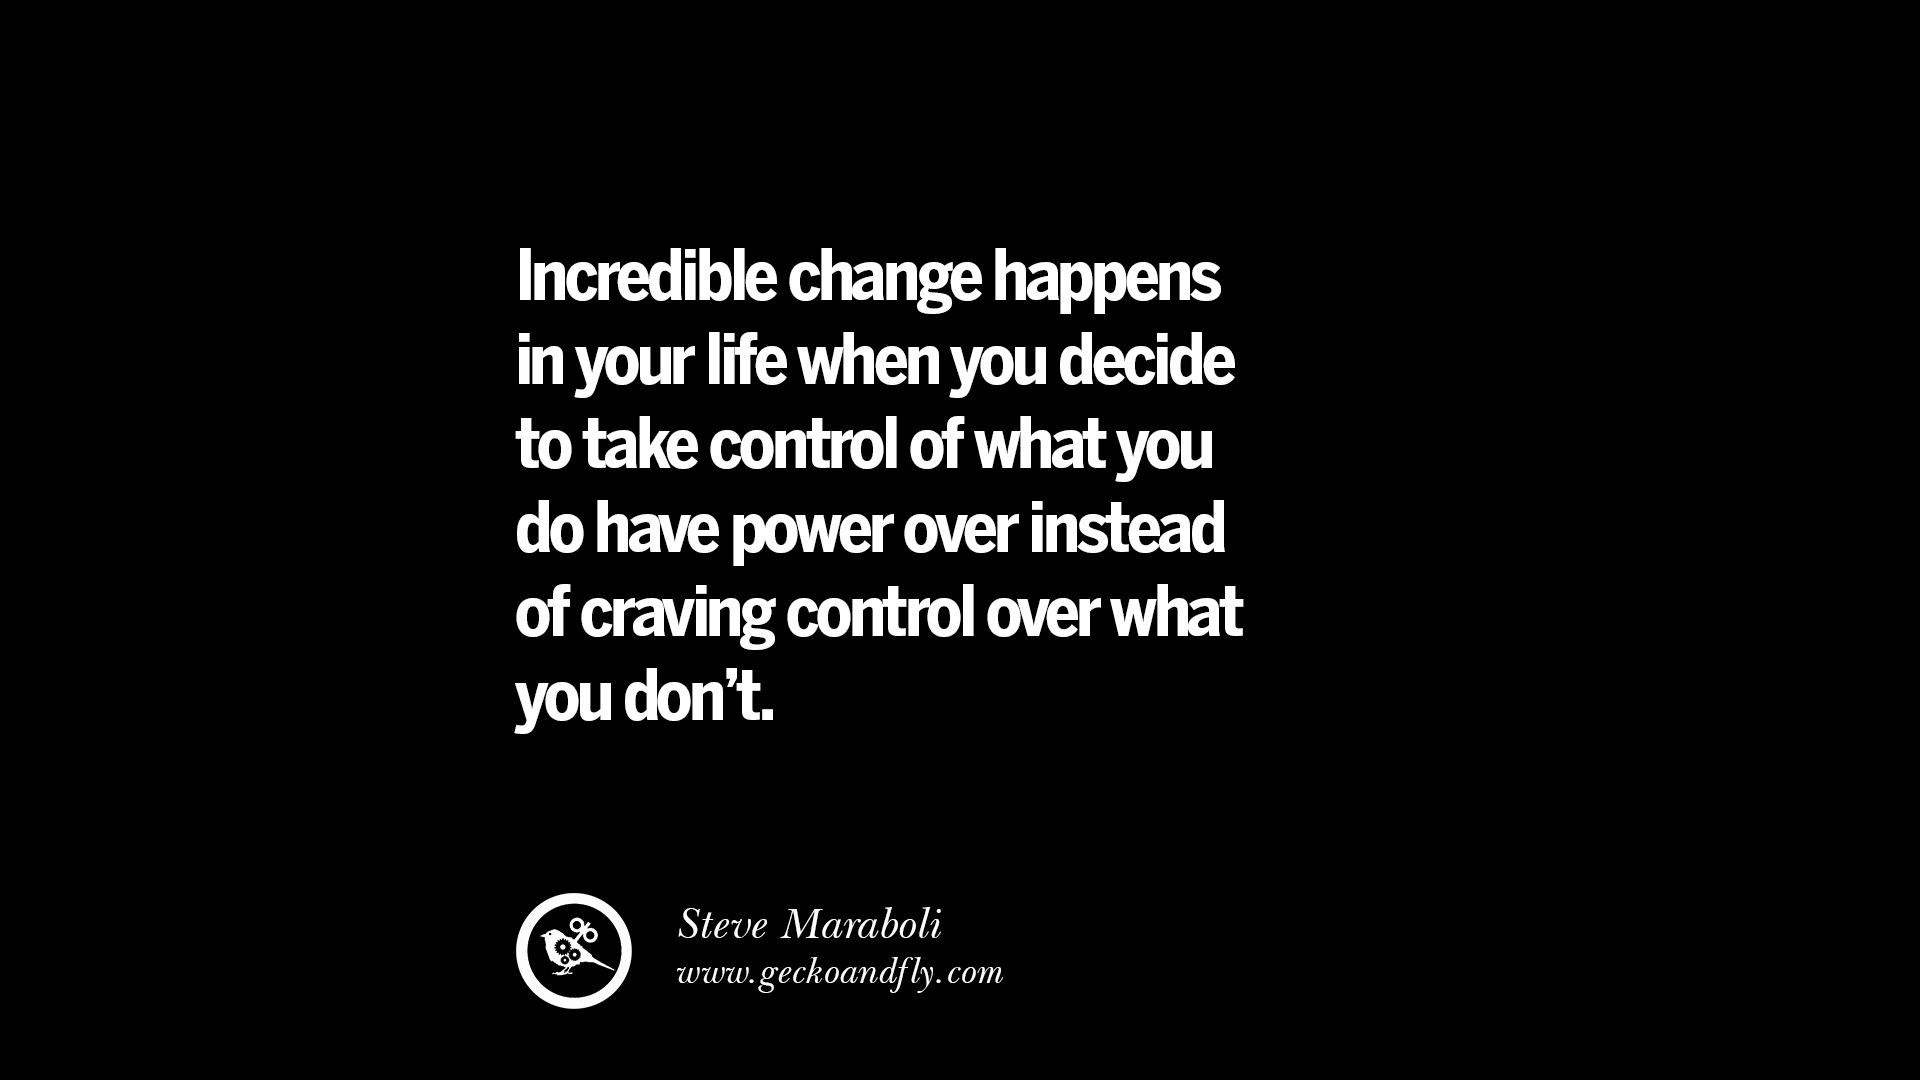 “Incredible change happens in your life when you decide to take control of what you do have power over instead of craving control over what you don t